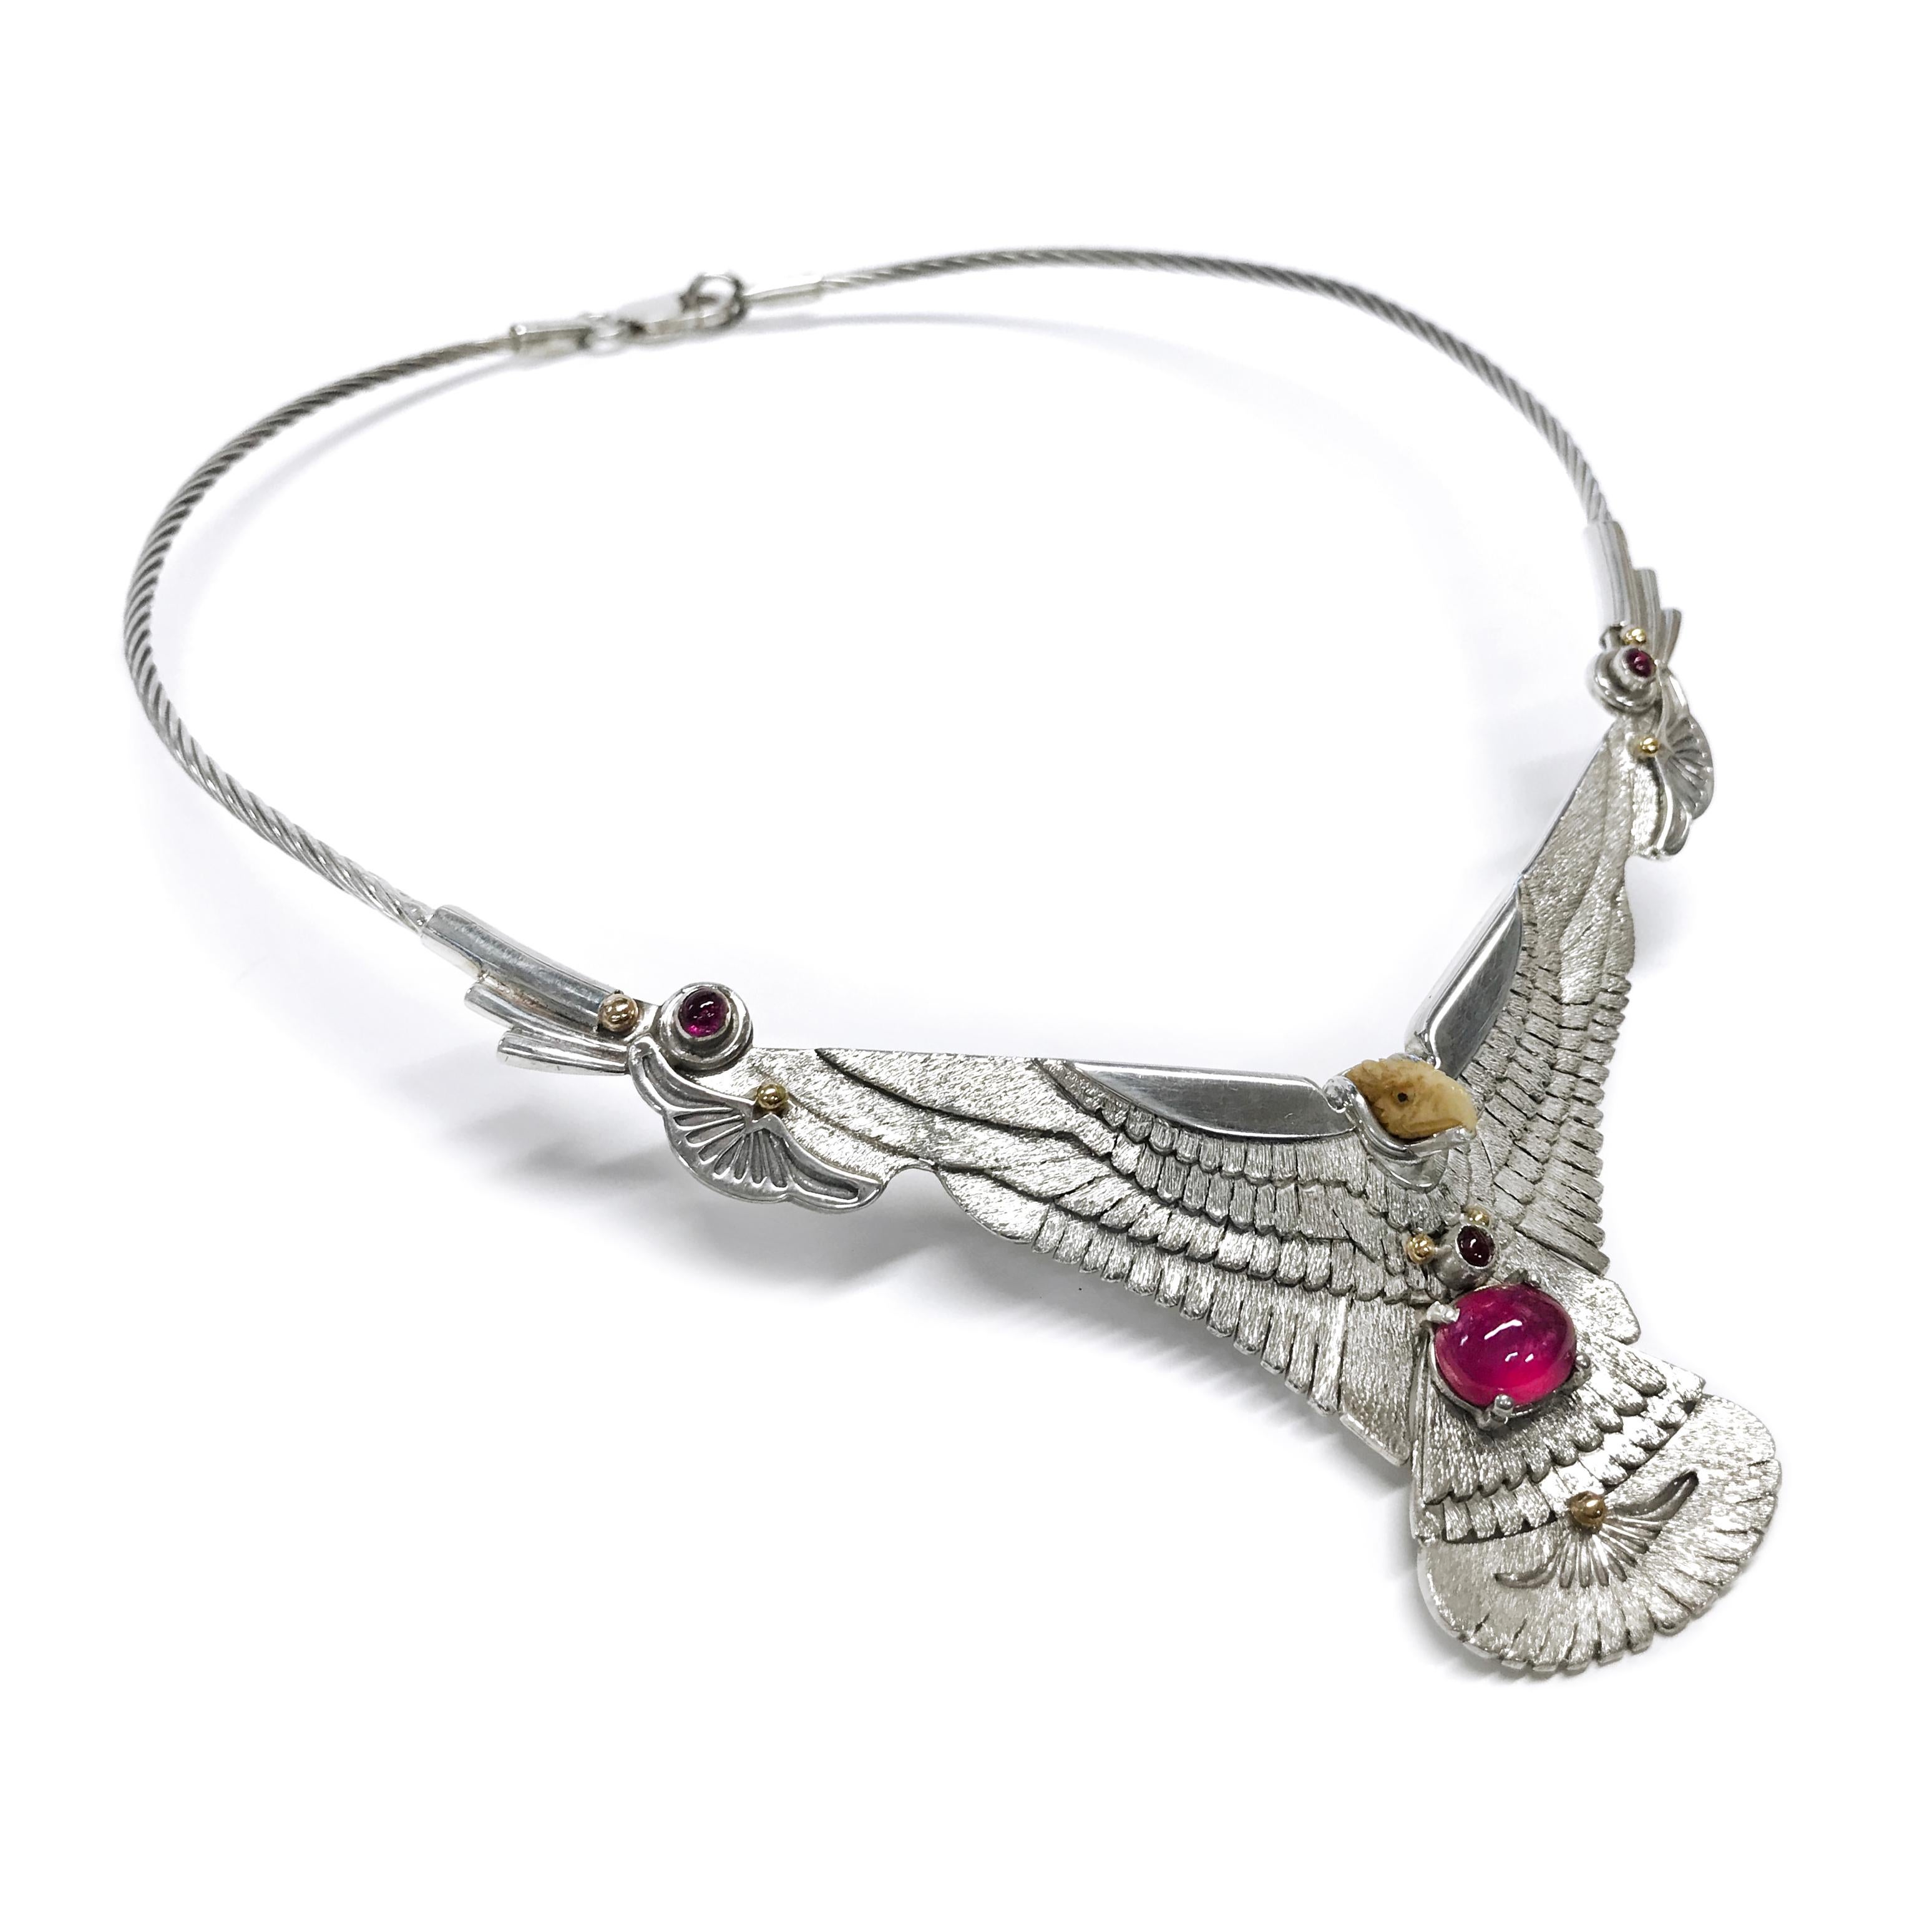 Handcrafted from a Sterling Silver sheet by jewelry maker, Ray Winner. The choker necklace consists of a silver eagle with outspread wings. The eagle head is made of carved bone and there is one prong-set oval Ruby cabochon and three round